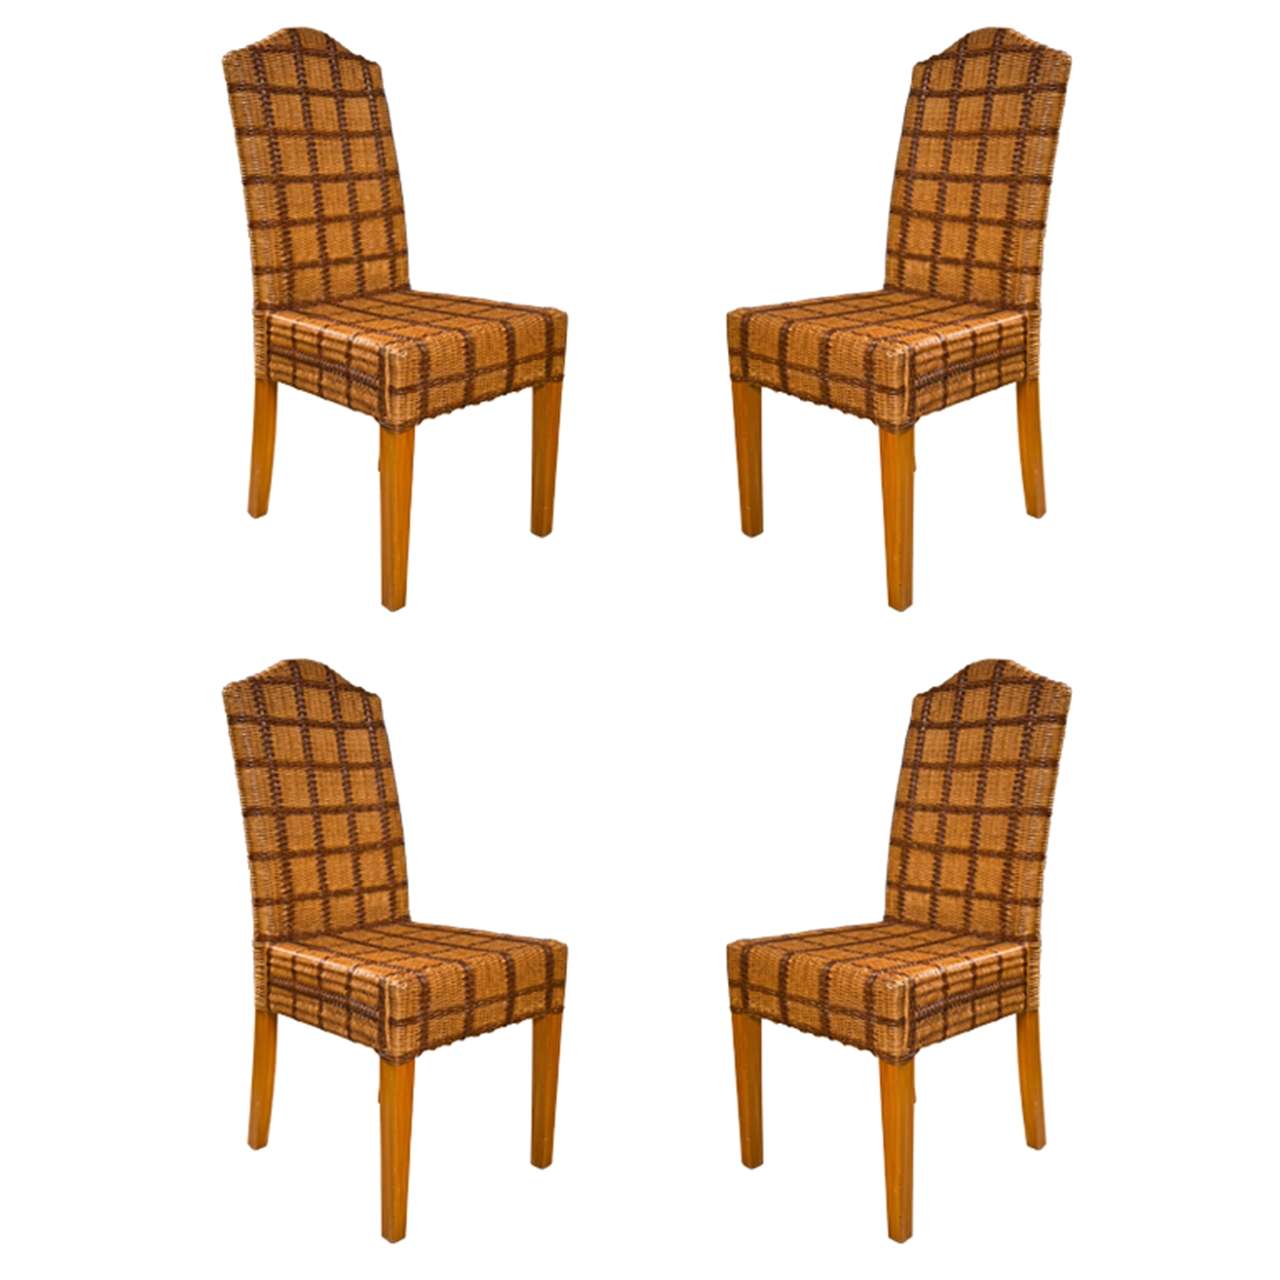 Set of Four Side Wicker Chairs by Palelek Tweed Decorated Seat And Back